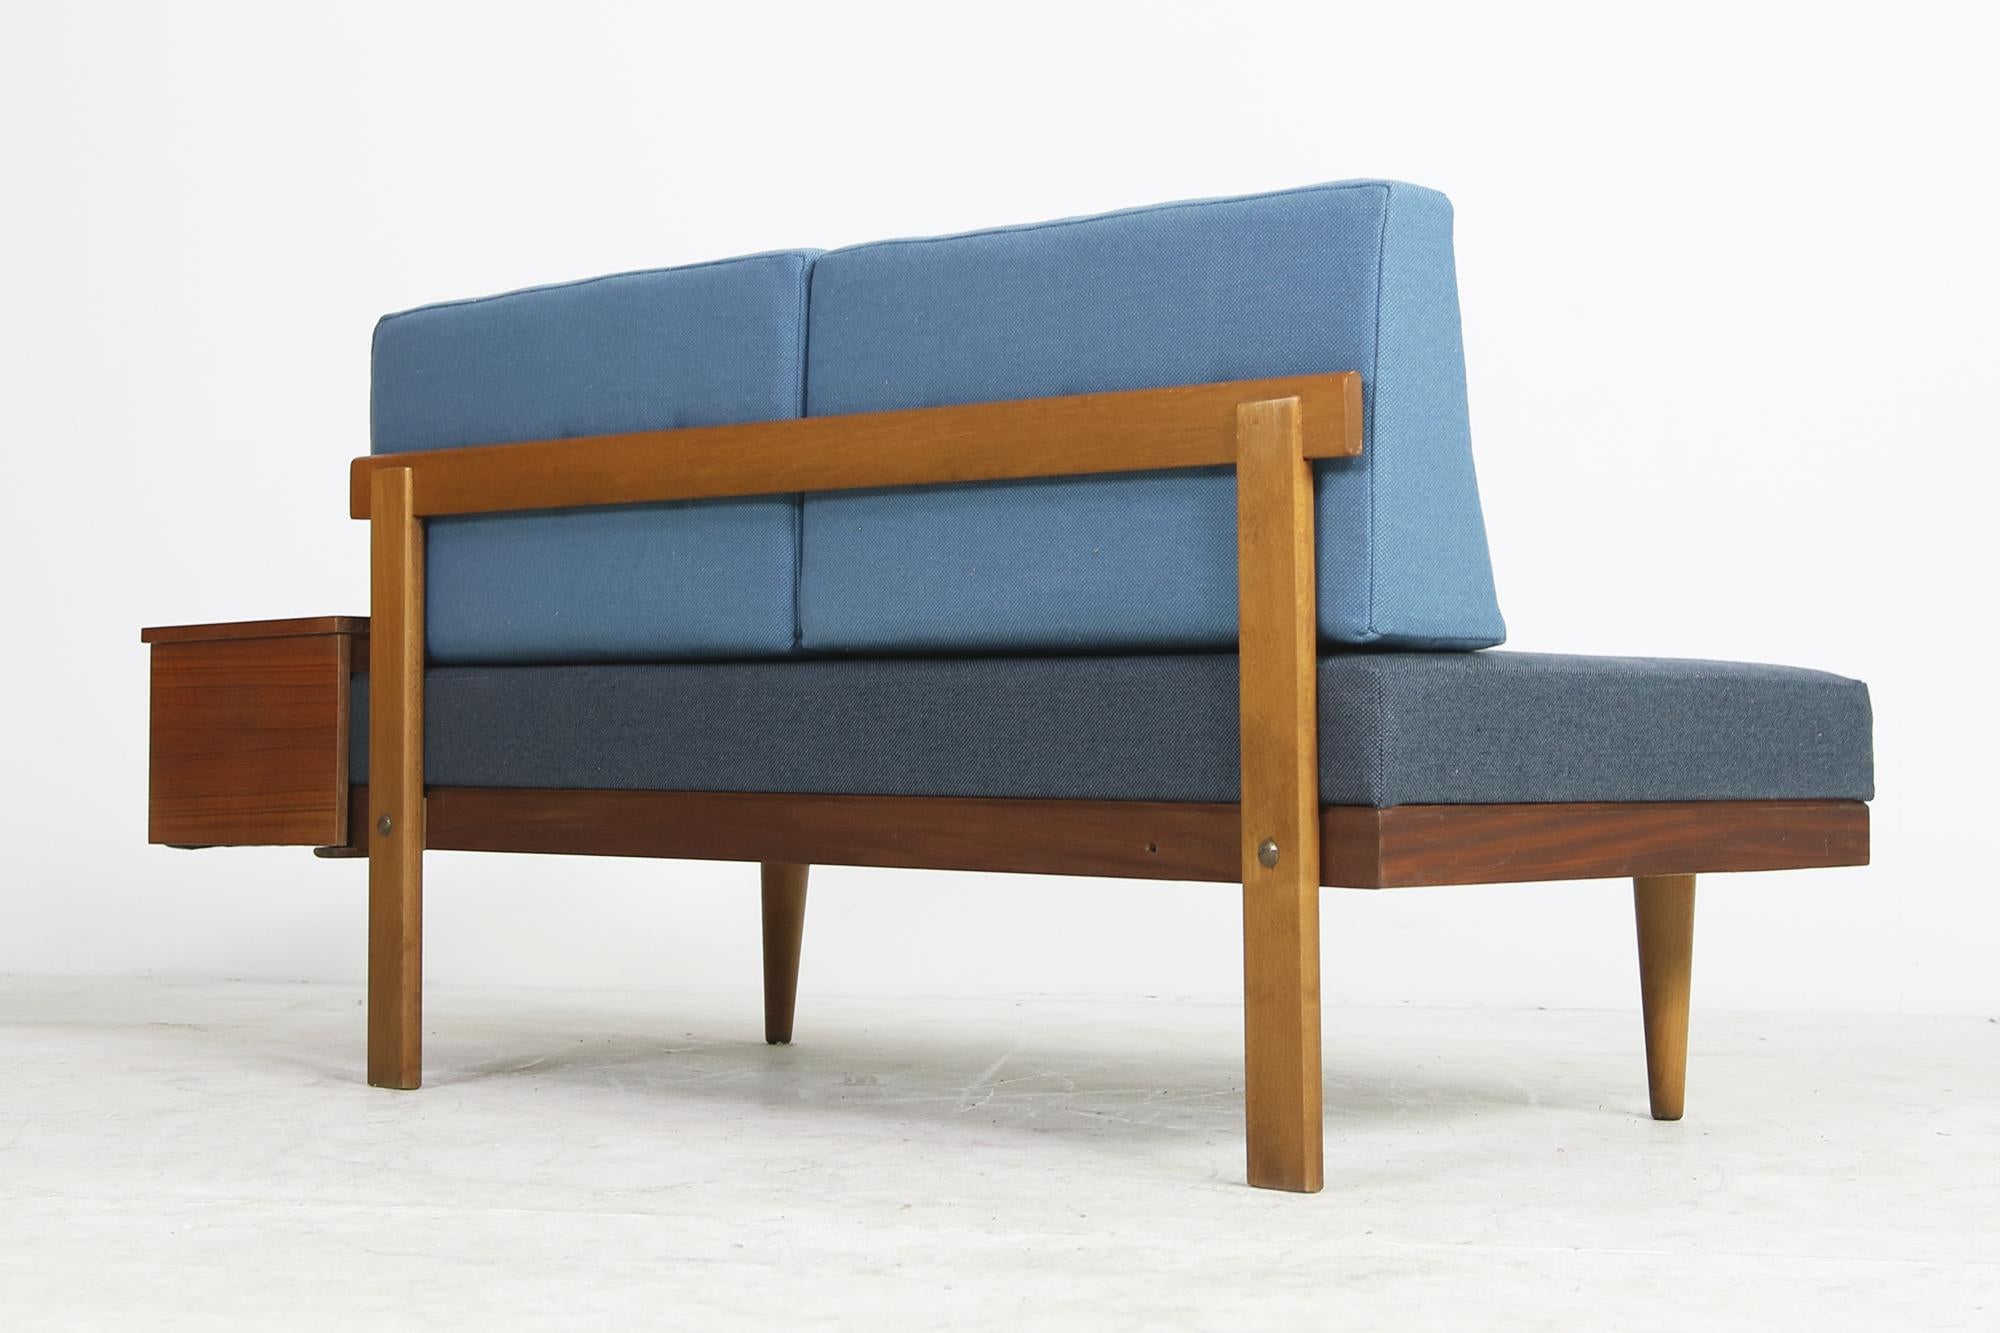 Beautiful Norwegian Mid-Century Modern daybed from the 1950s in fantastic condition. Teak and beech base in great condition, also possible using it as a daybed, the side table can be extended, newly covered in beautiful blue tones.

Sofa